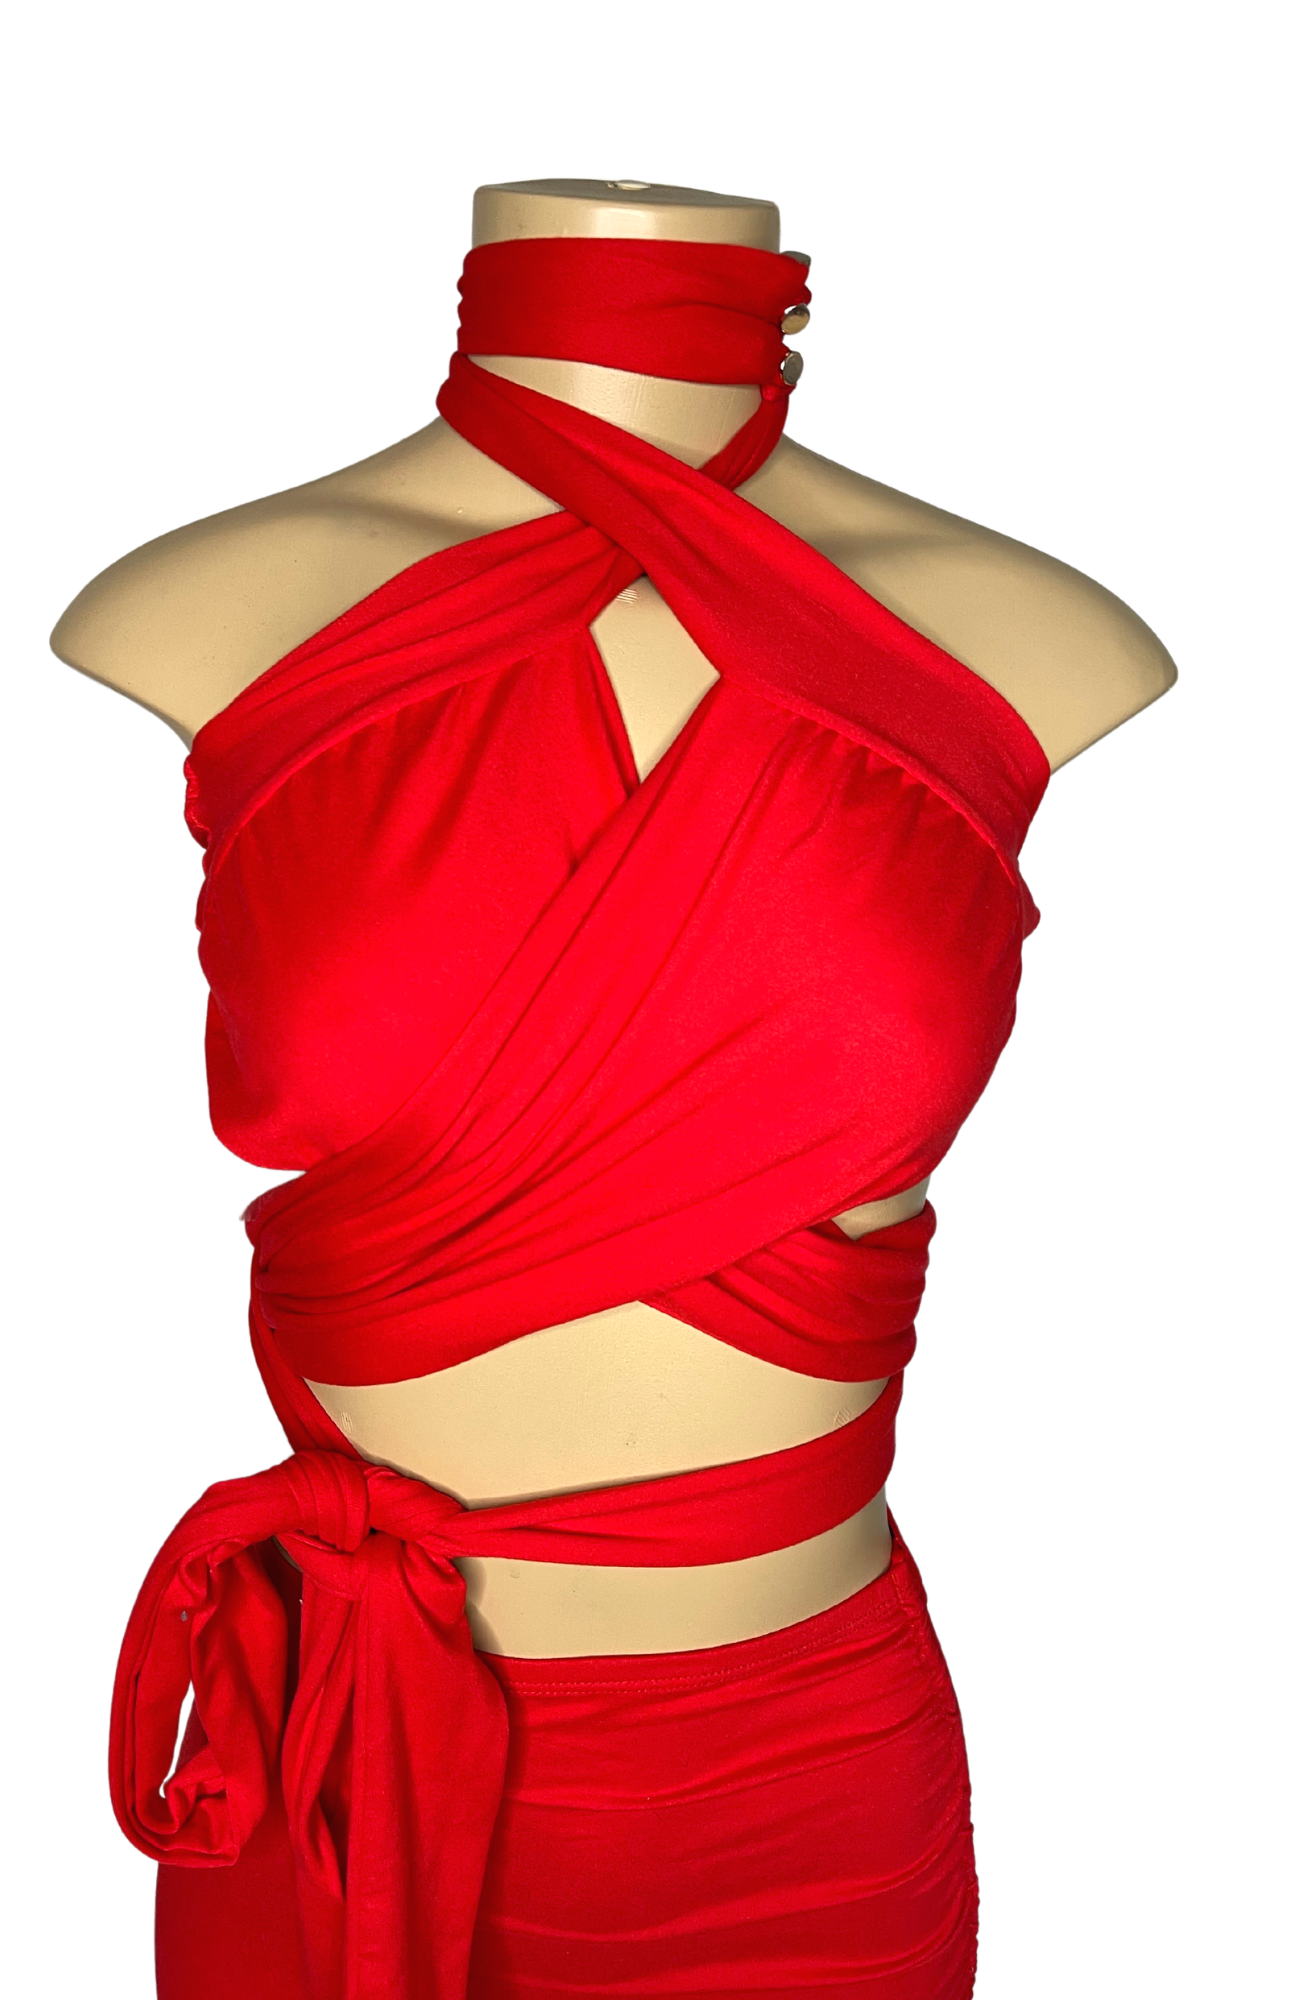 red, red oufit,stretchy oufit,skirt set,crop top,wrap around top,maxi skirt,matching,set,sets,red sets,yup she bad, yup she bad sets,valentines outfit, valentines day outfit,